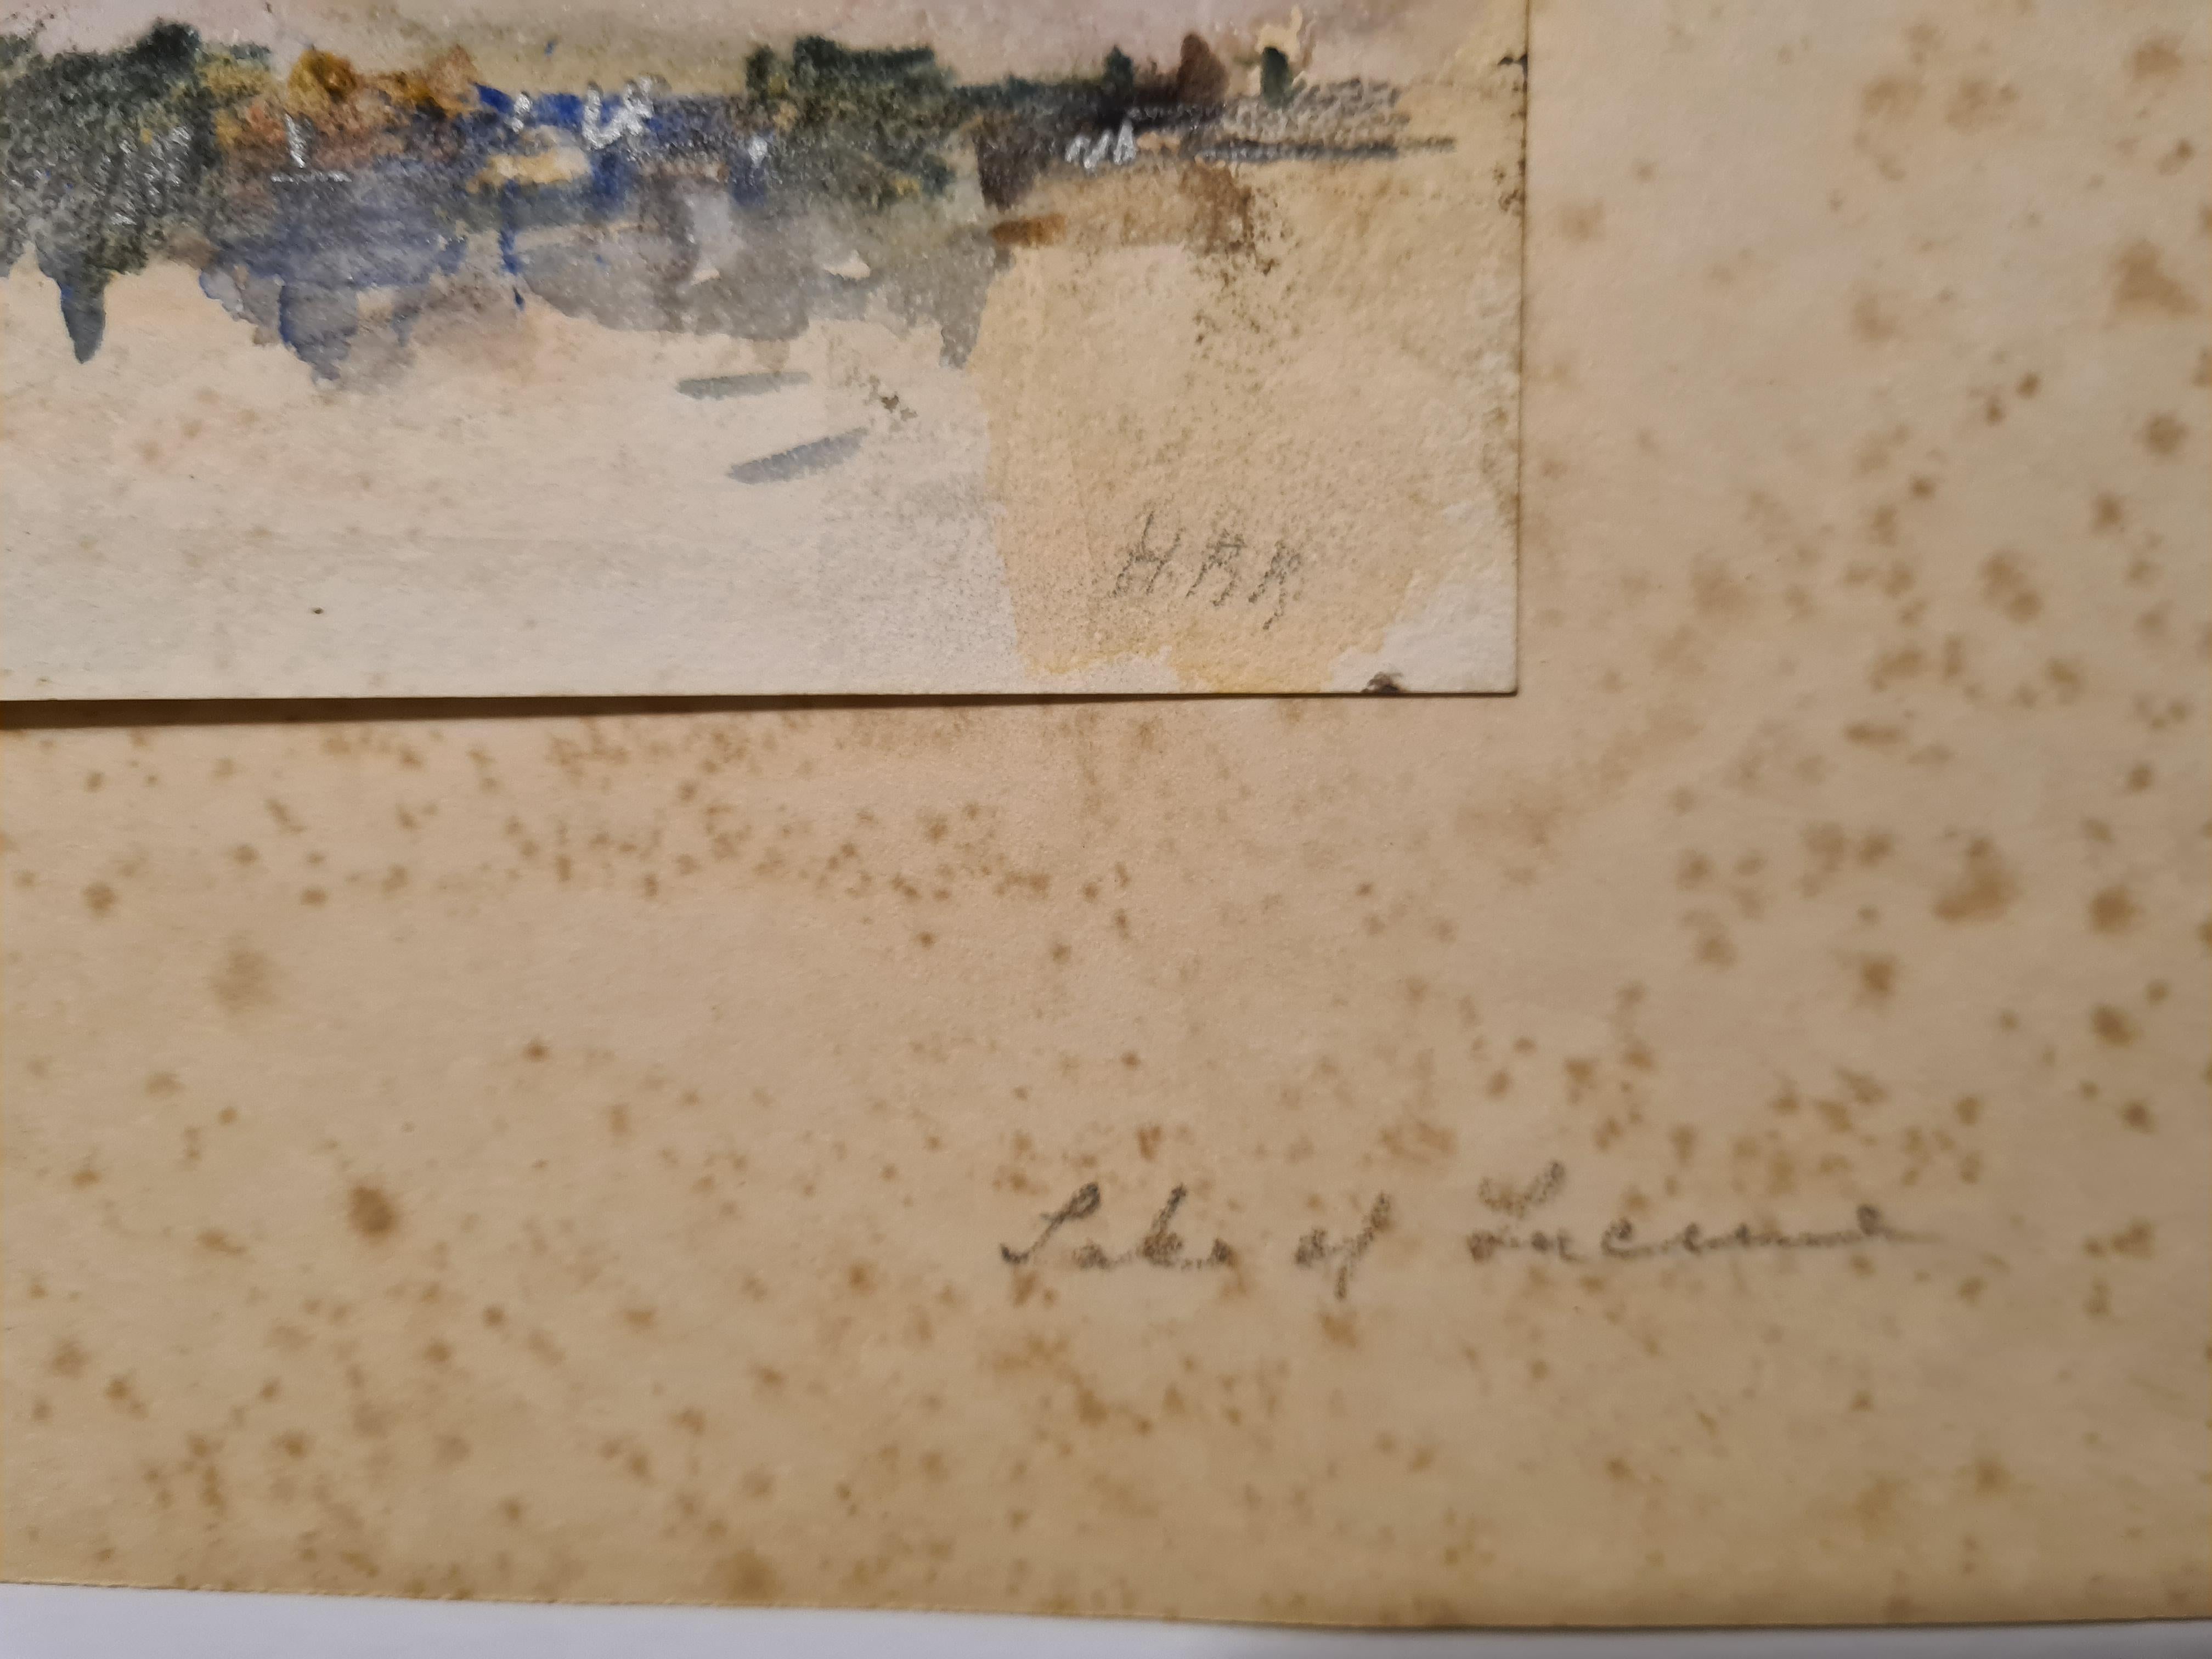 19th century Impressionist view, in watercolour, in the style of Turner, of Lake Lucerne, Switzerland by Hercules Brabazon Brabazon. The work is titled and initial signed (HBB) by the artist. A very evocative work, in its day very modern and cutting